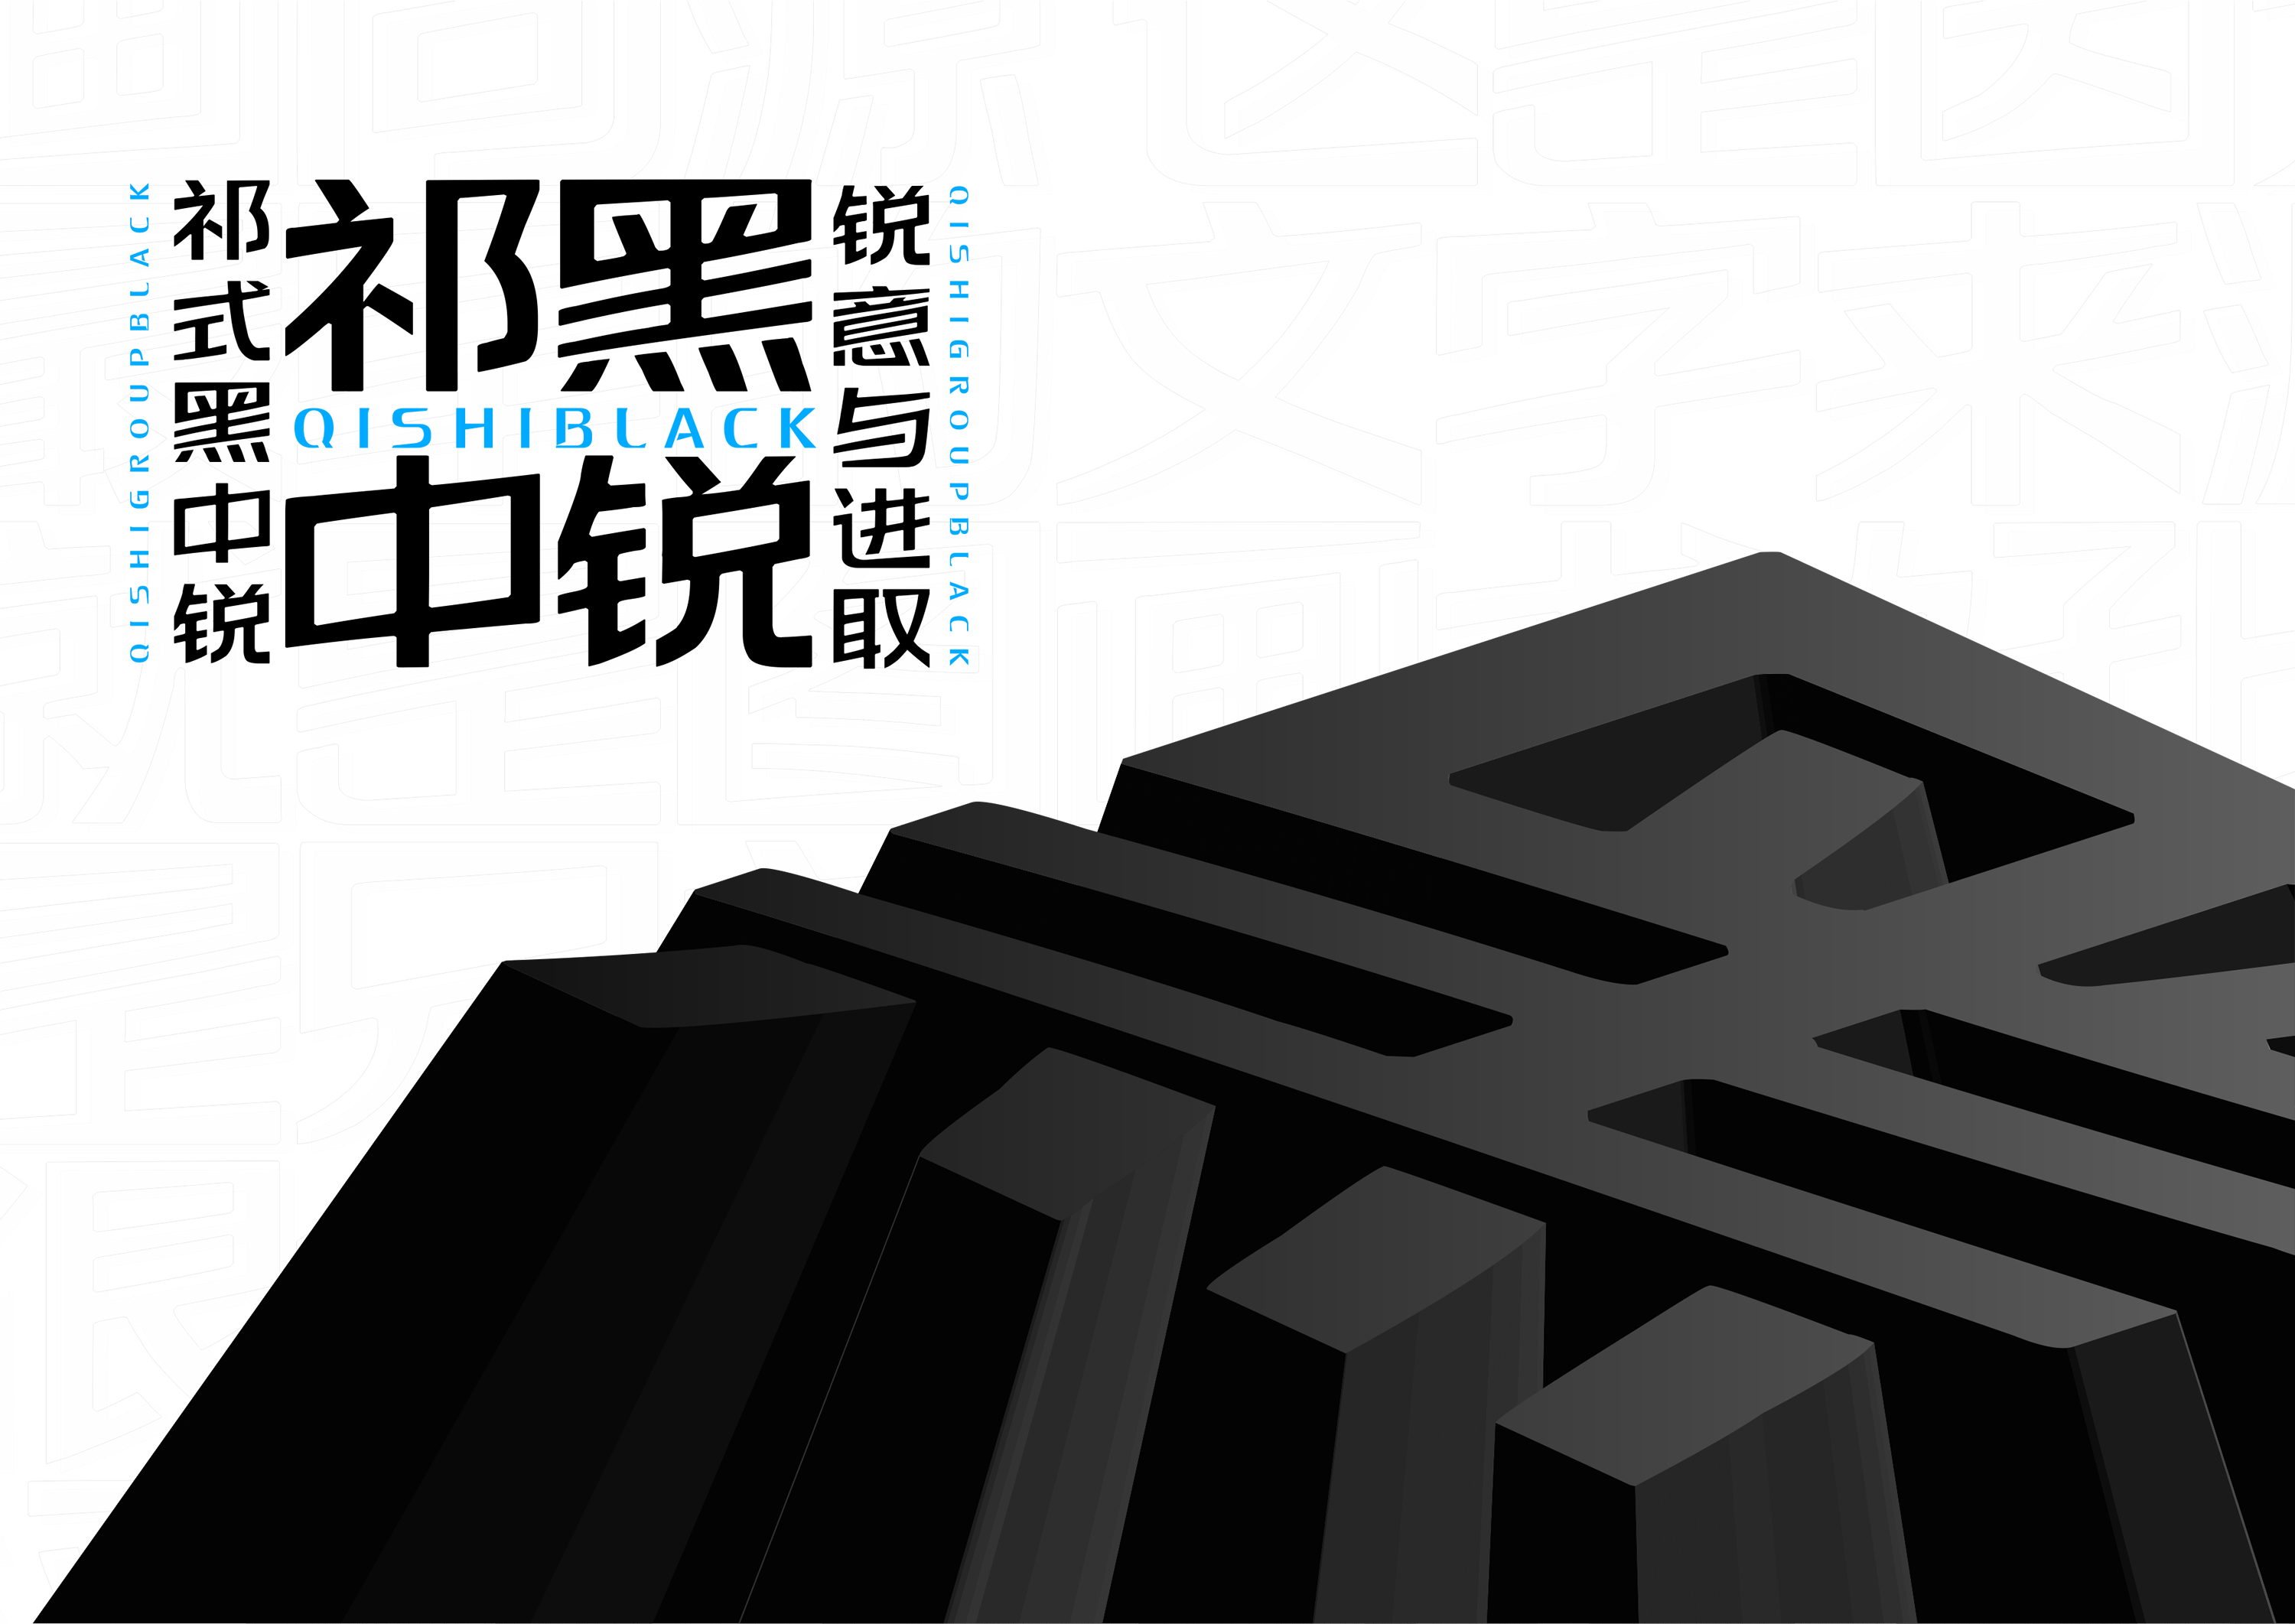 50P Collection of the latest Chinese font design schemes in 2021 #.99